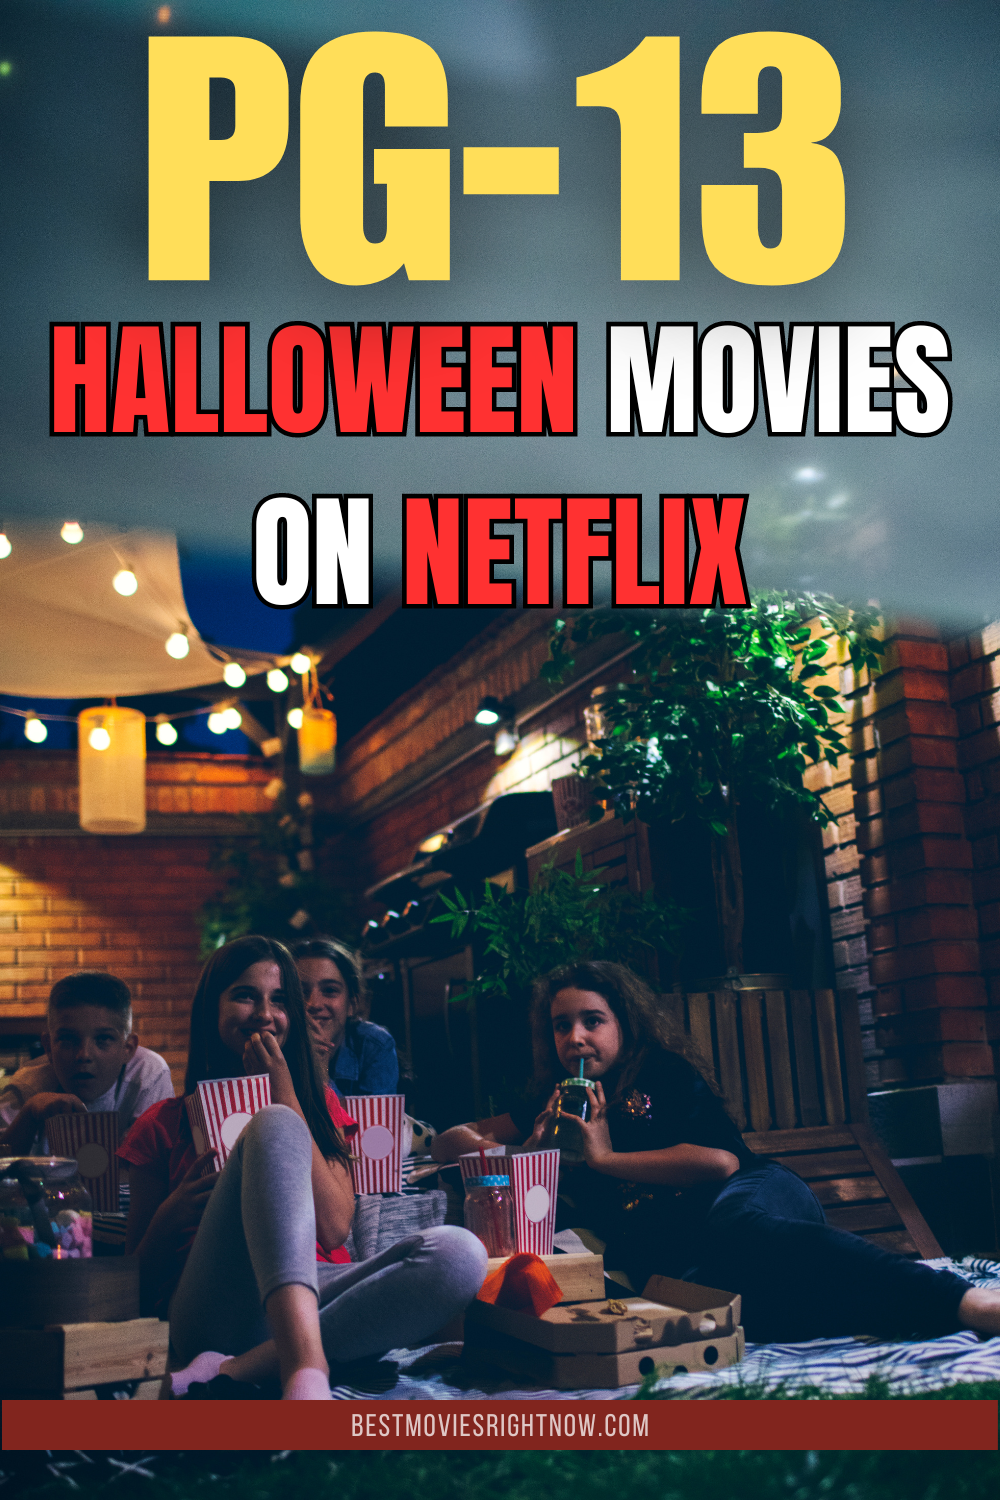 teens watching movie outdoor with text: "pg-13 halloween movies on Netflix"